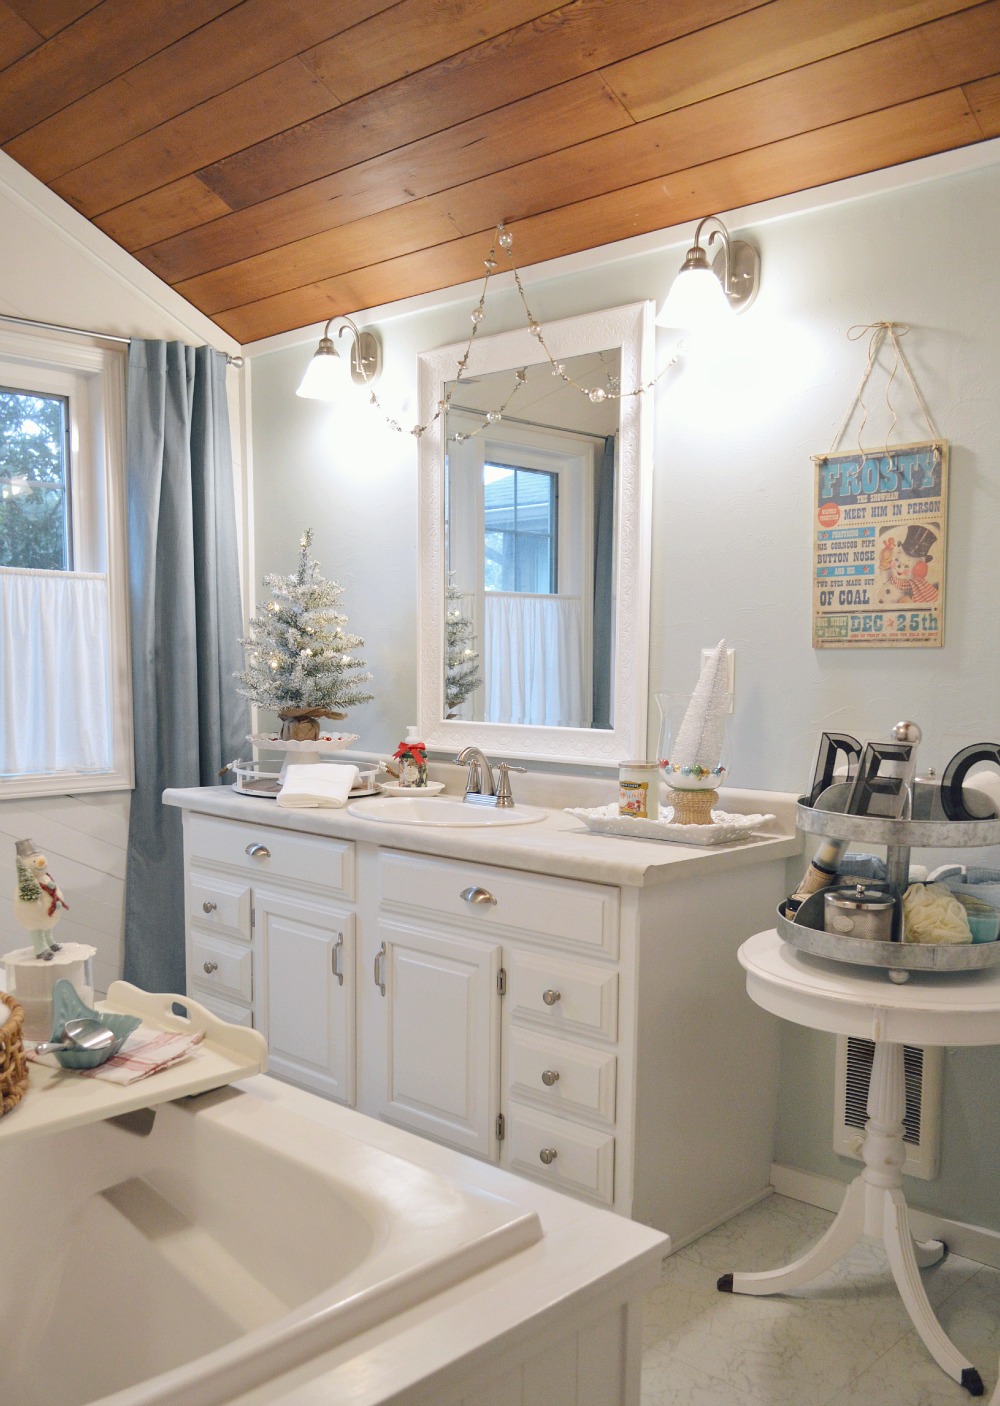 Fox Hollow Cottage Christmas Bathroom - Frosty the snowman theme in aqua and white with galvanized metal and rustic wood.